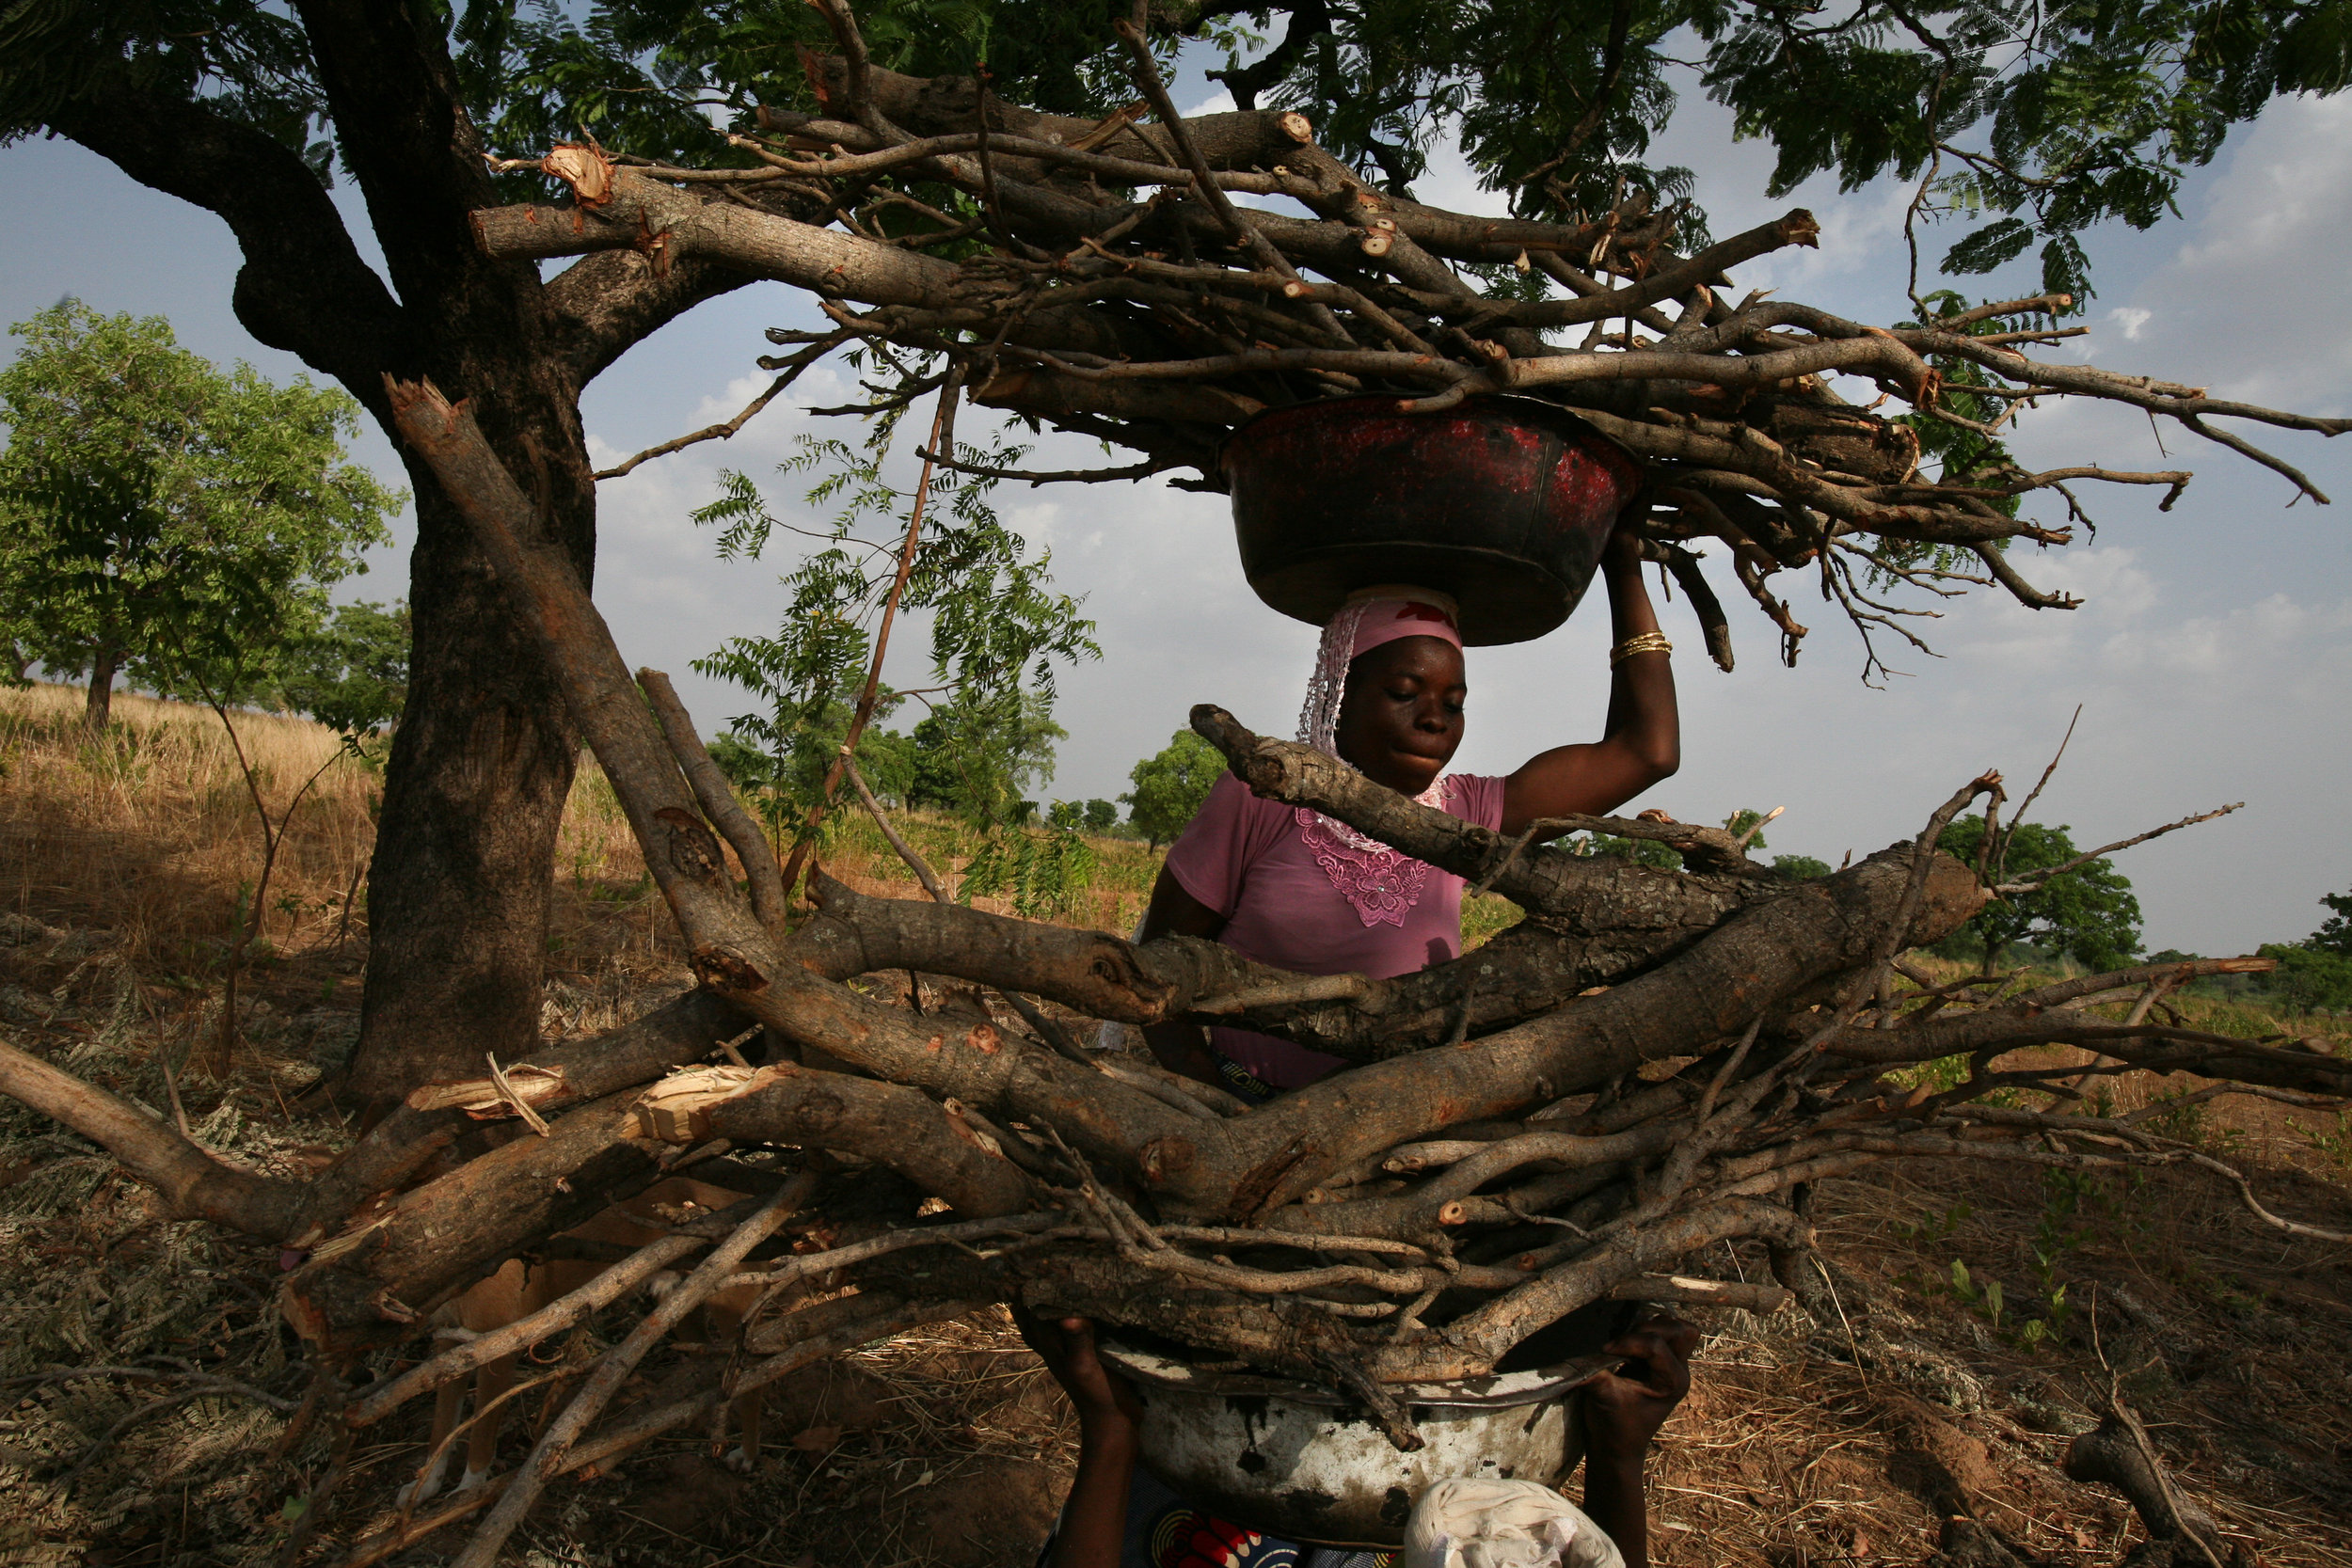  Amariya, a young woman who returned to her village to marry after working as a Kayayo in Accra, lifts firewood onto her head outside of Tampion, Northern Region, Ghana on March 25, 2009. As a recently married woman, she performs the majority of the 